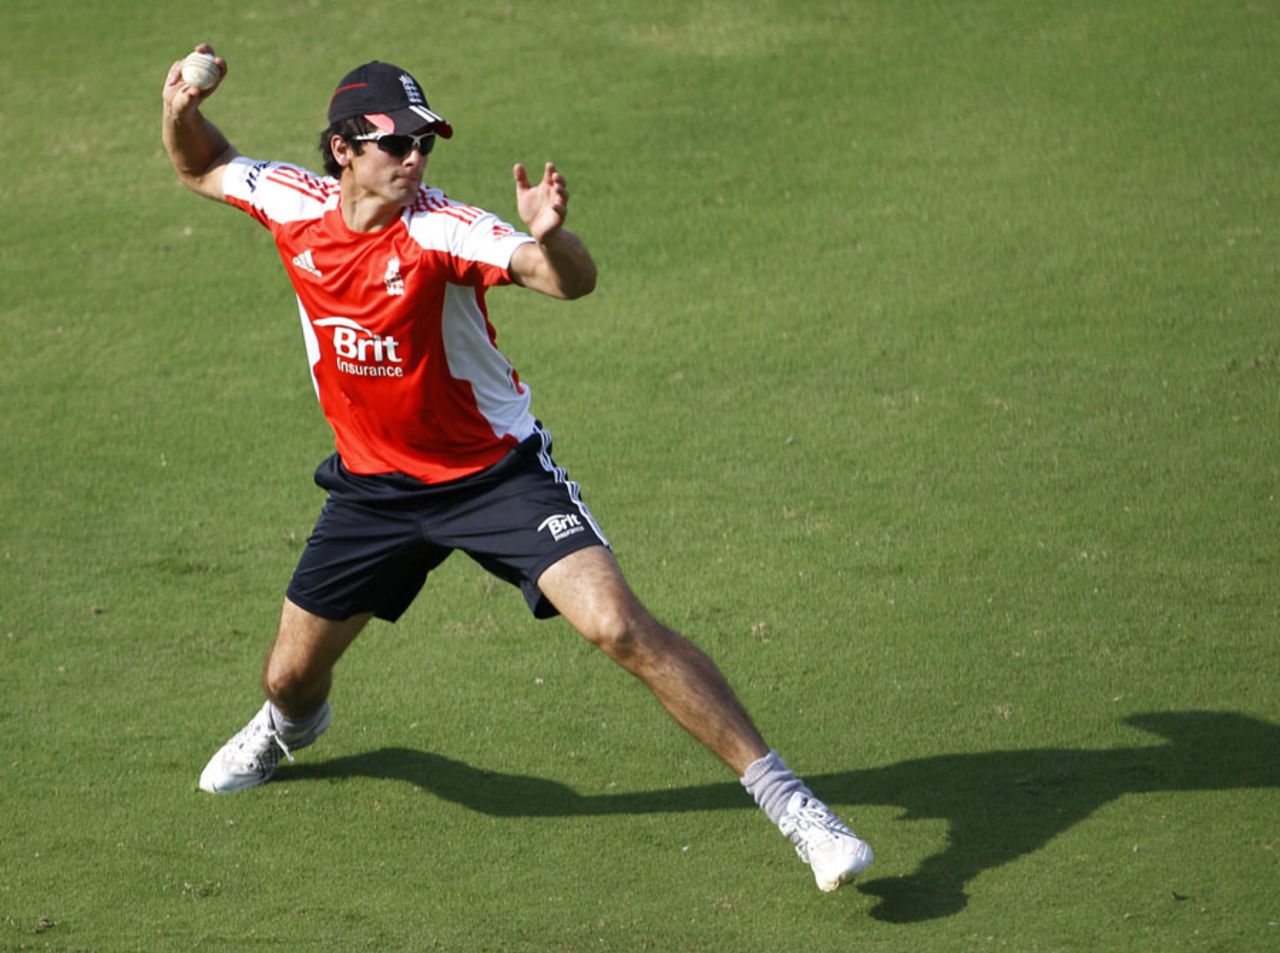 Alastair Cook participates in a fielding drill, Hyderabad, October 13, 2011